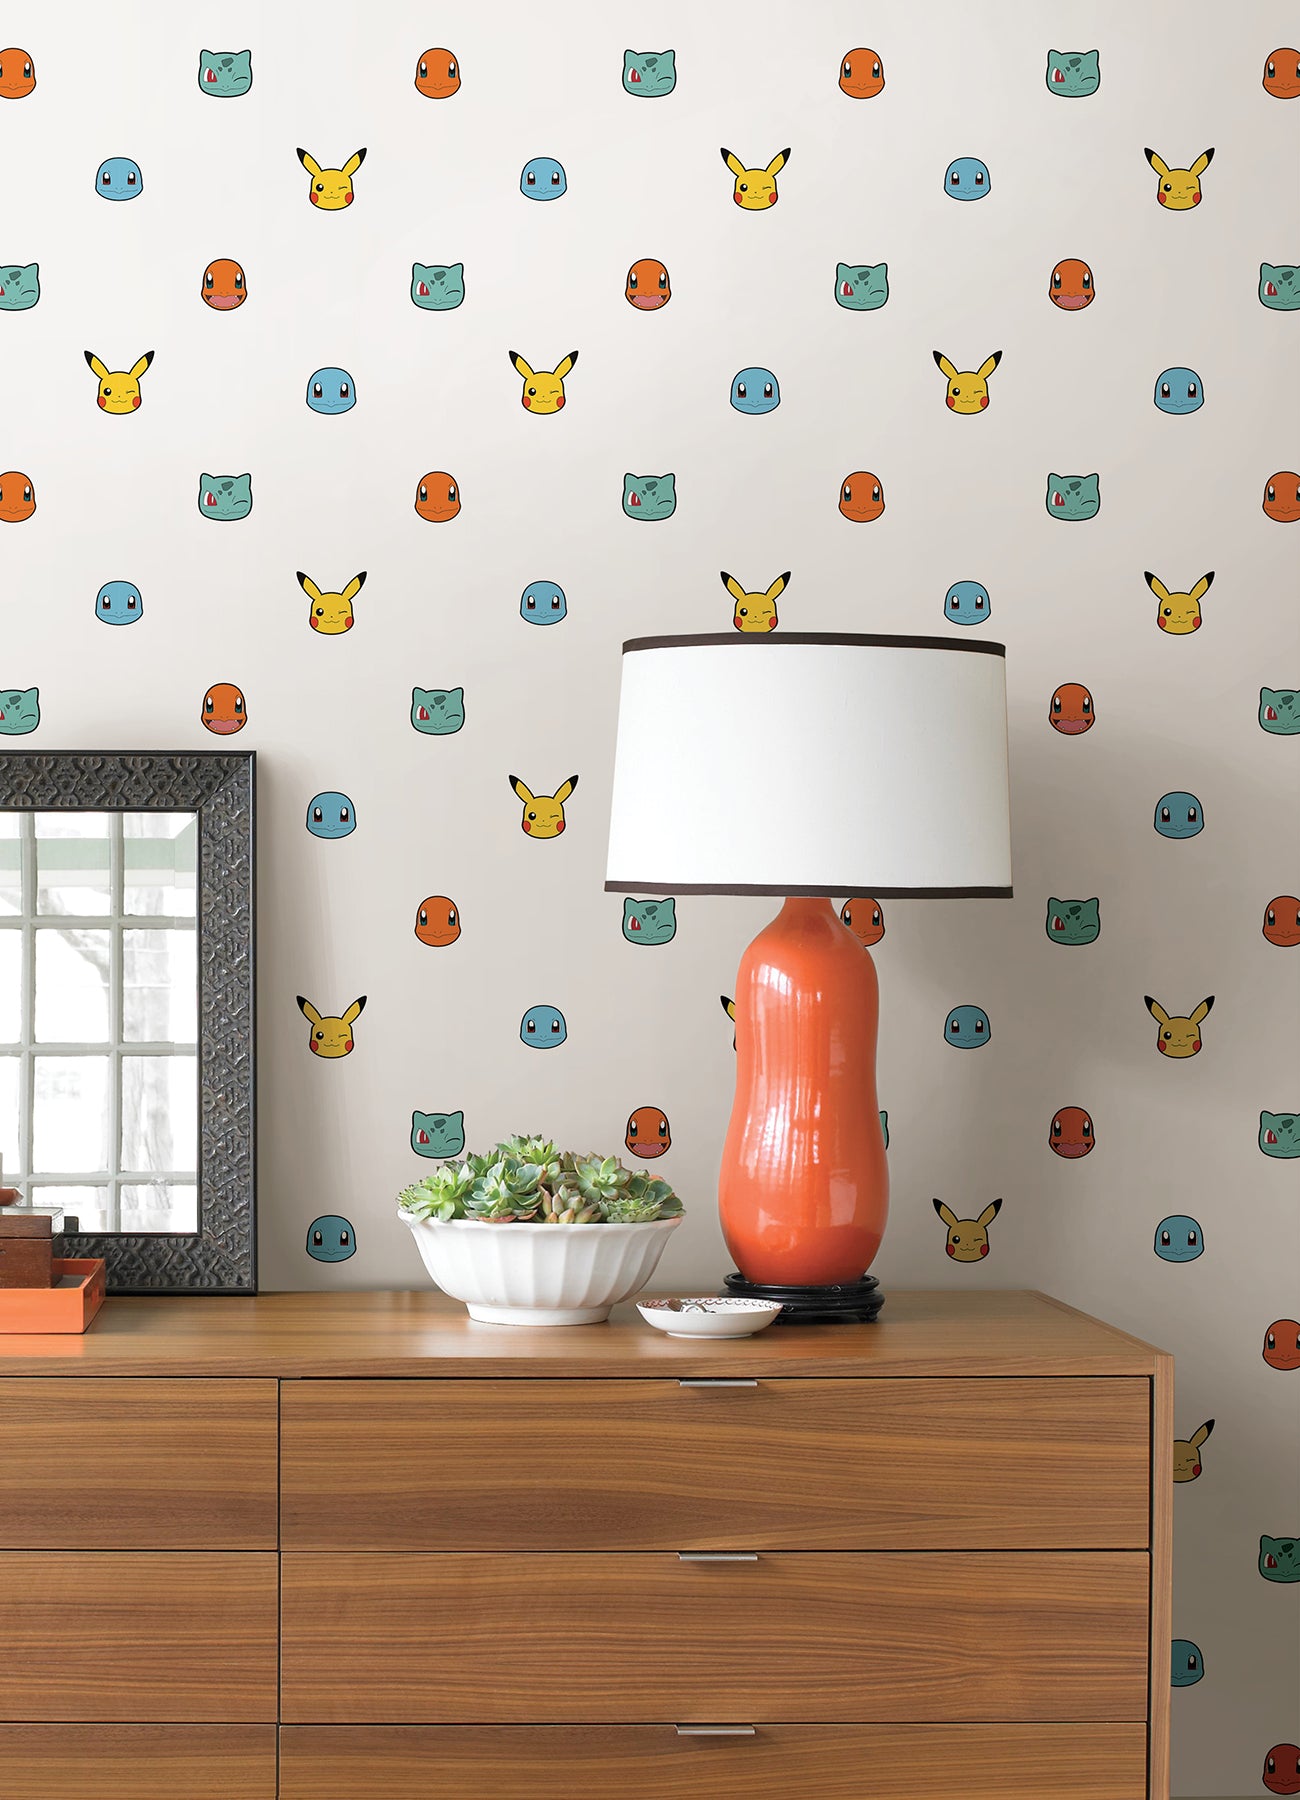 Pokémon Character Faces Peel and Stick Wallpaper Peel and Stick Wallpaper RoomMates   